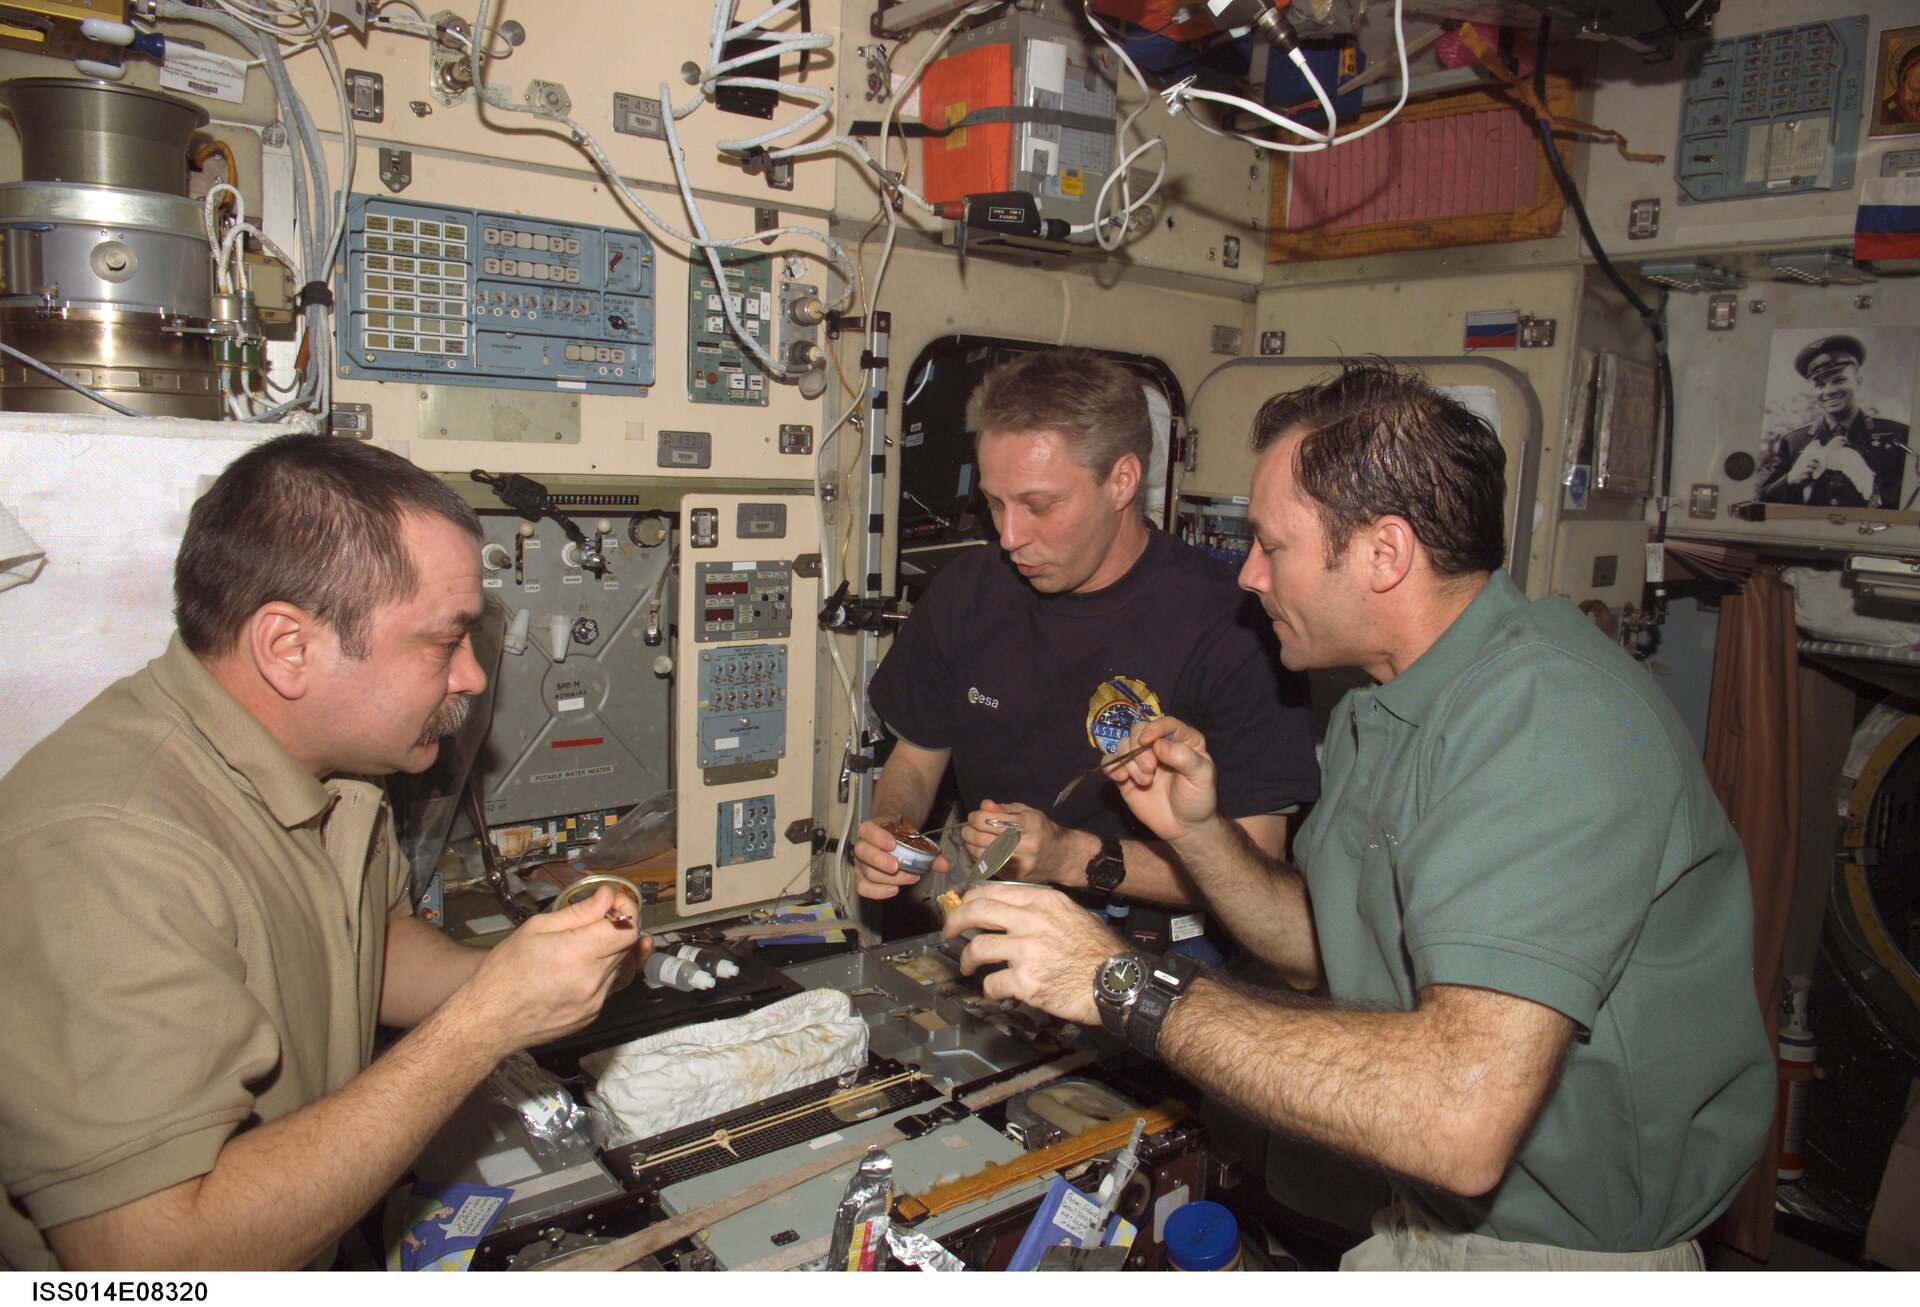 Meal at the galley in the Zvezda Service Module